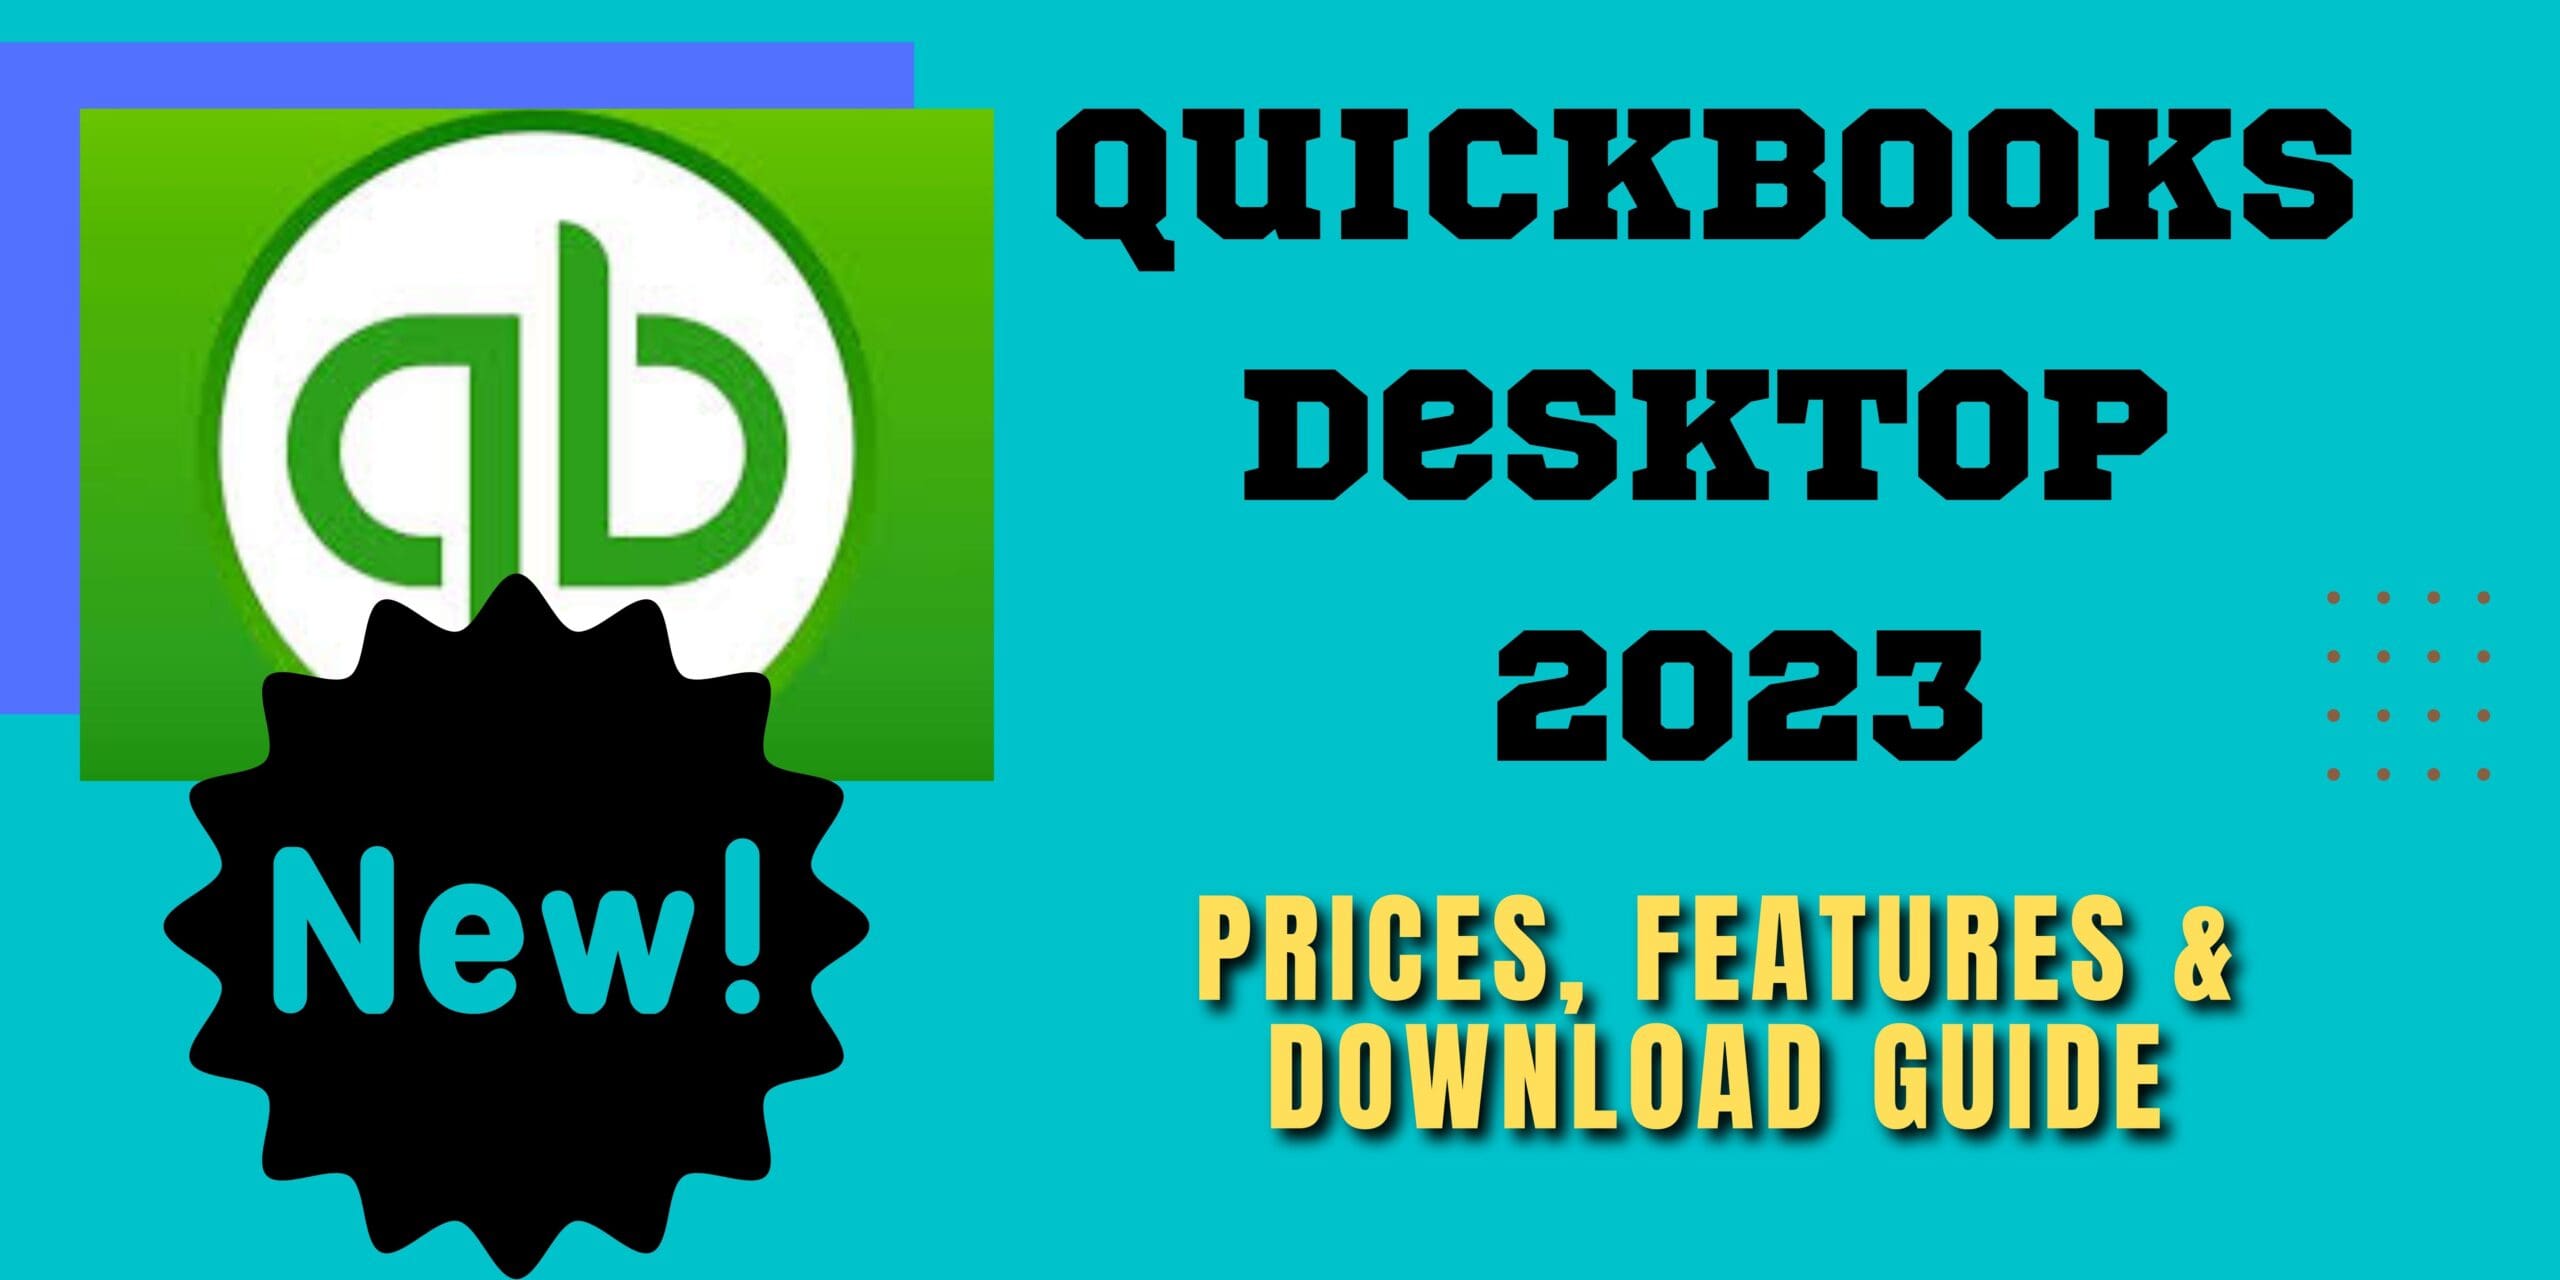 Quickbooks Desktop 2023: Features, Pricing, and Downloading Process